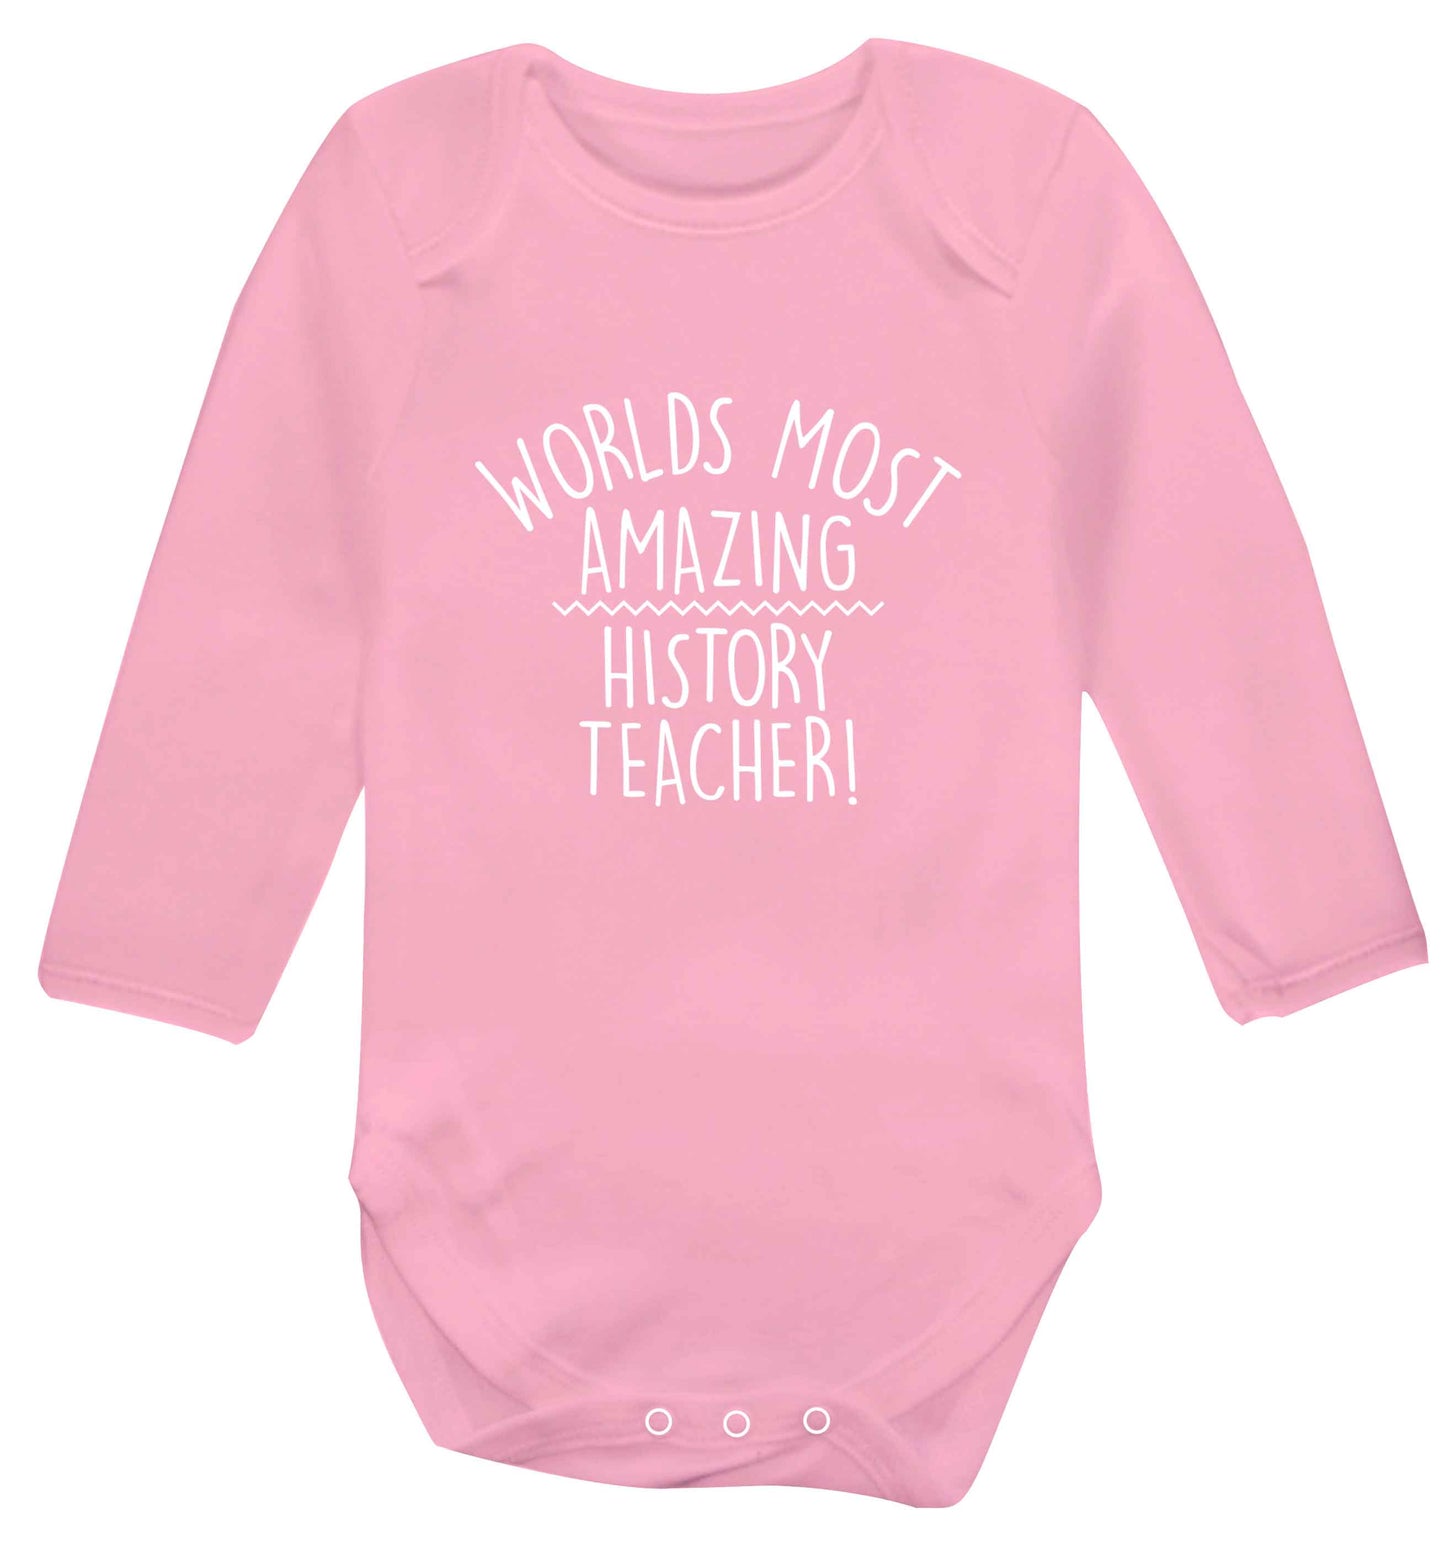 Worlds most amazing History teacher baby vest long sleeved pale pink 6-12 months